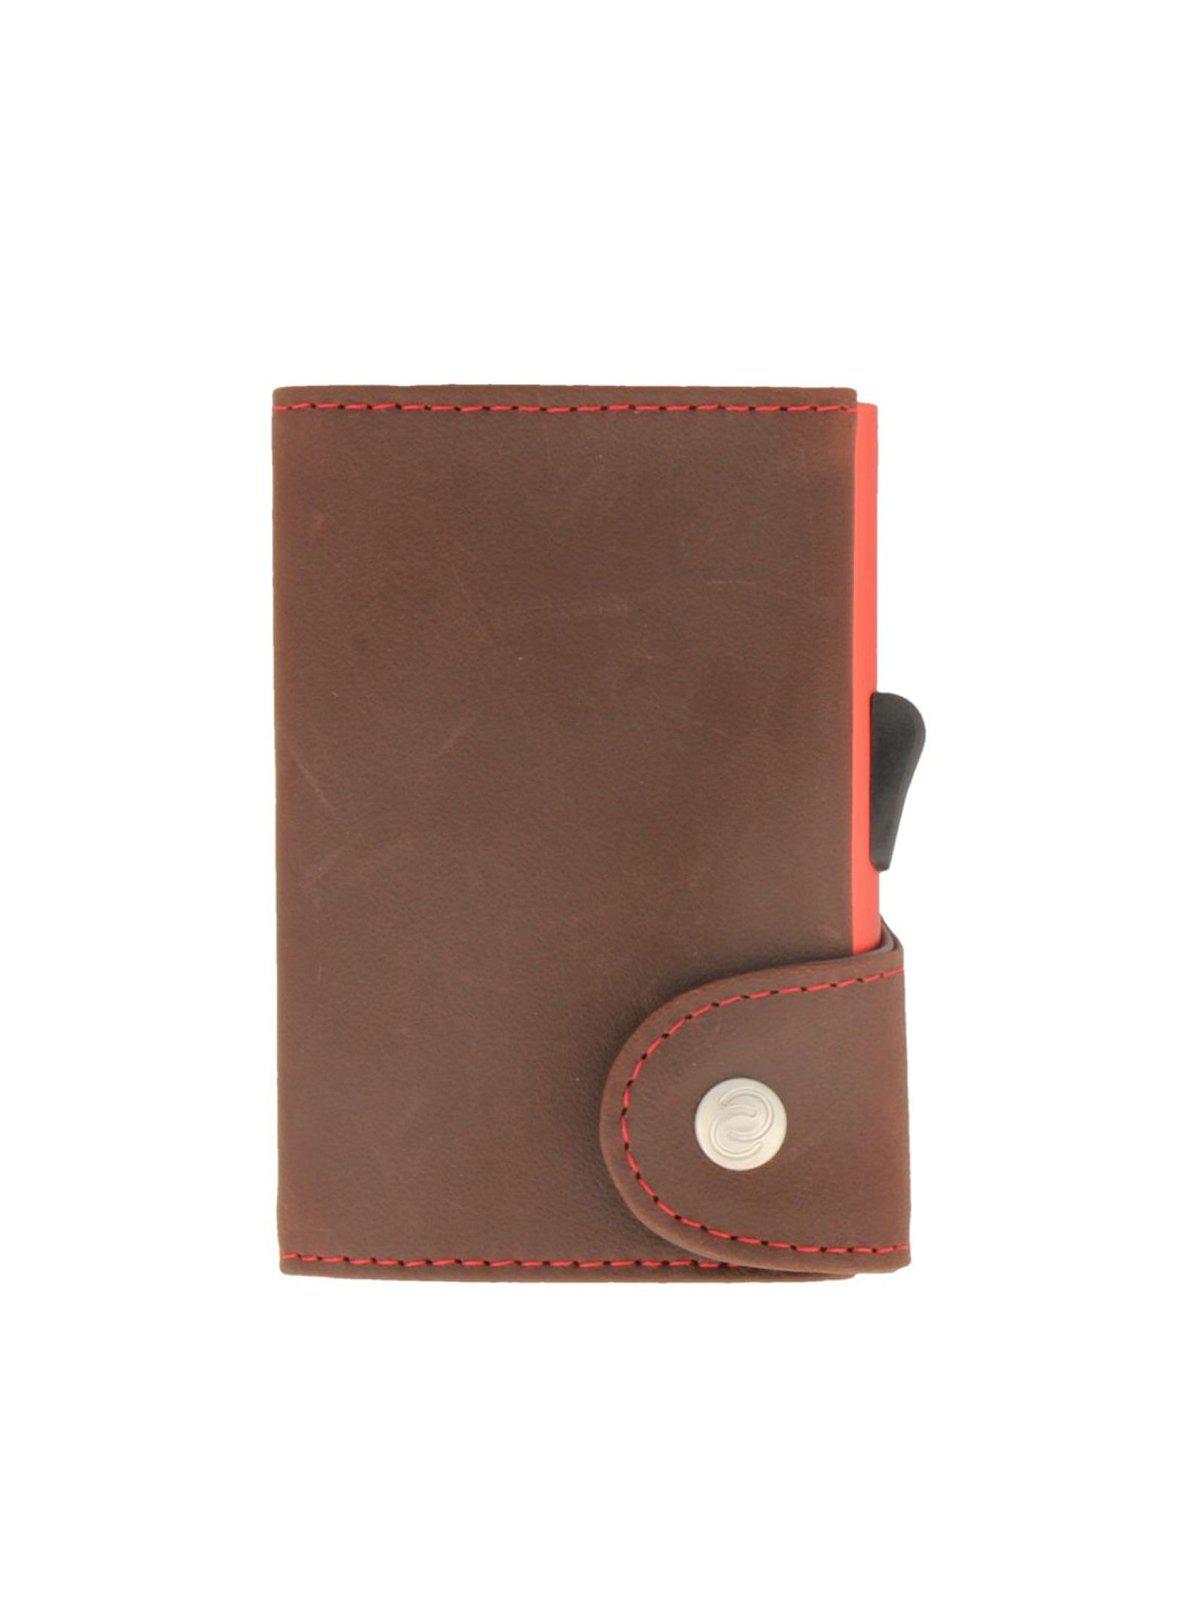 C-Secure Italian Leather RFID Wallet Auburn - MORE by Morello Indonesia